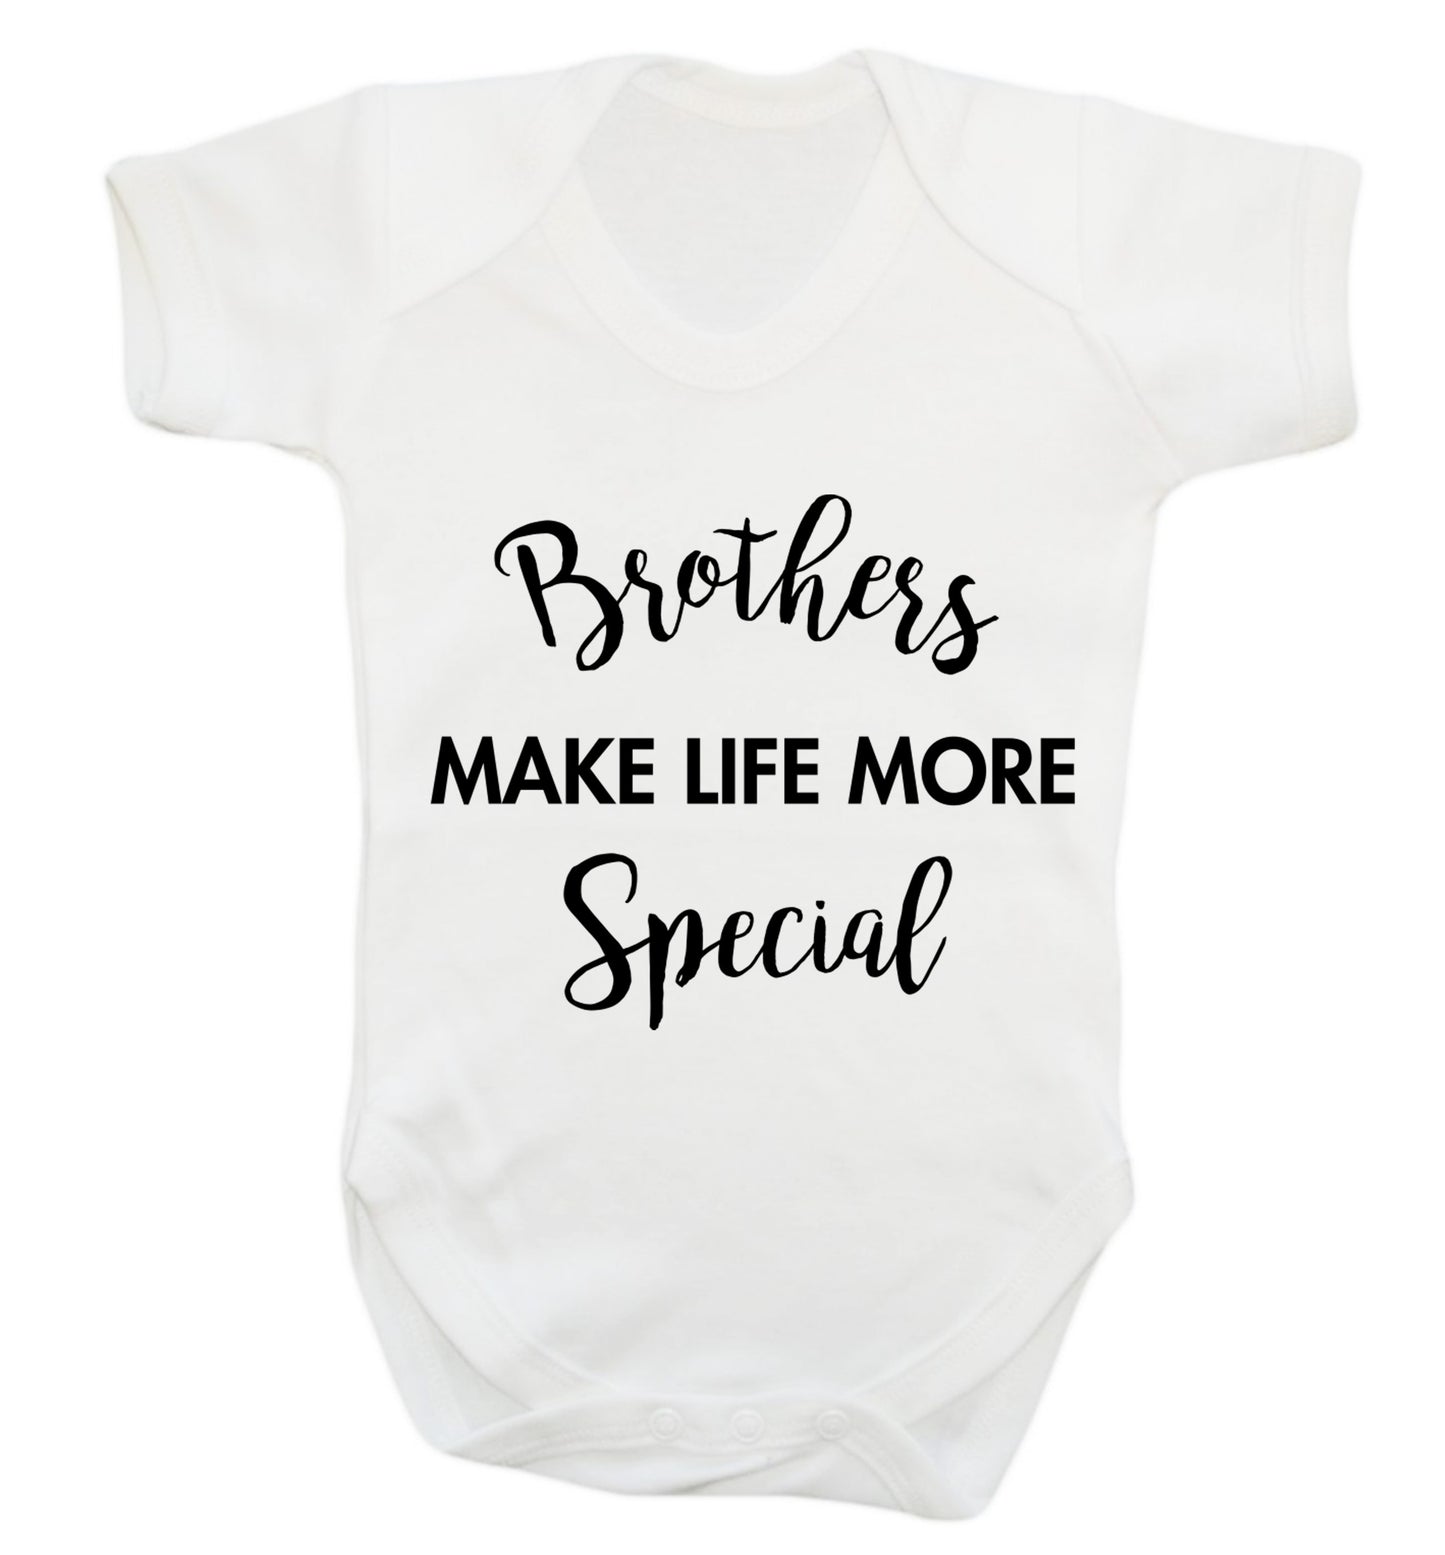 Brothers make life more special Baby Vest white 18-24 months